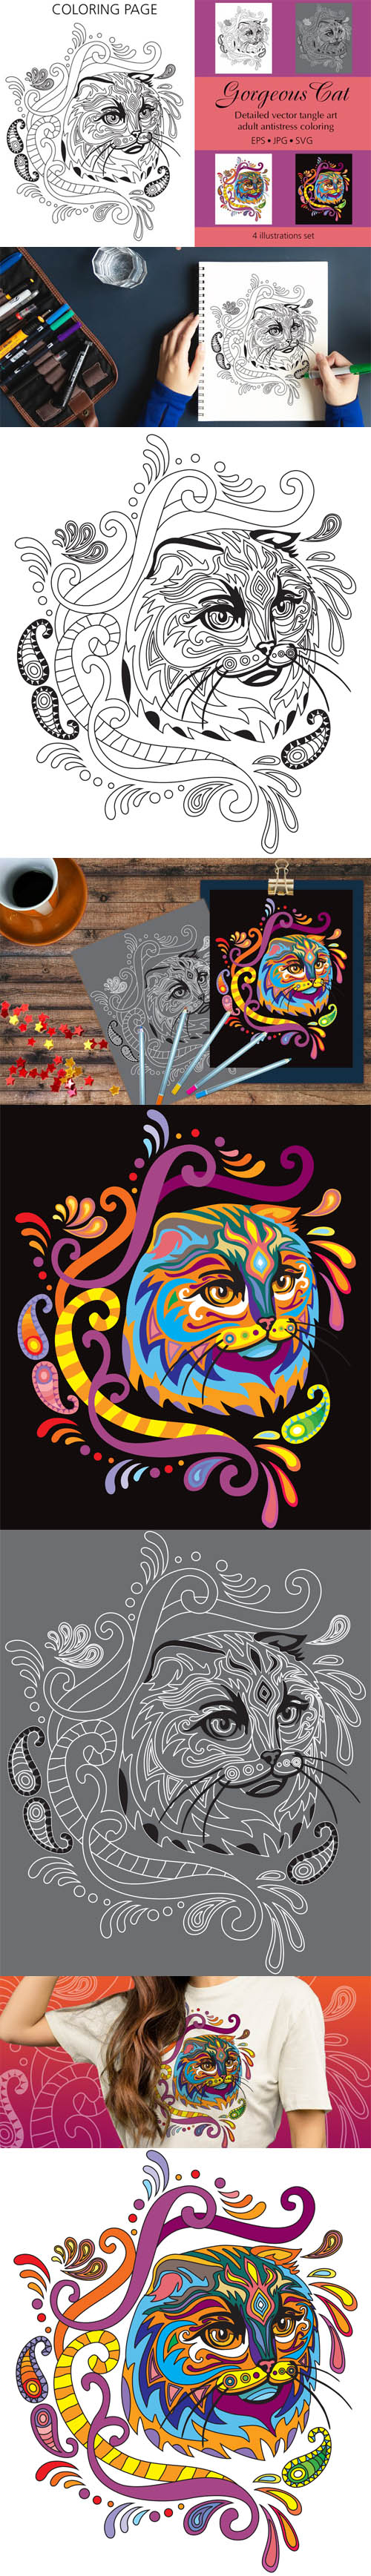 Gorgeous Cat - Detailed Vector Tangle Art - Adult Antistress Coloring